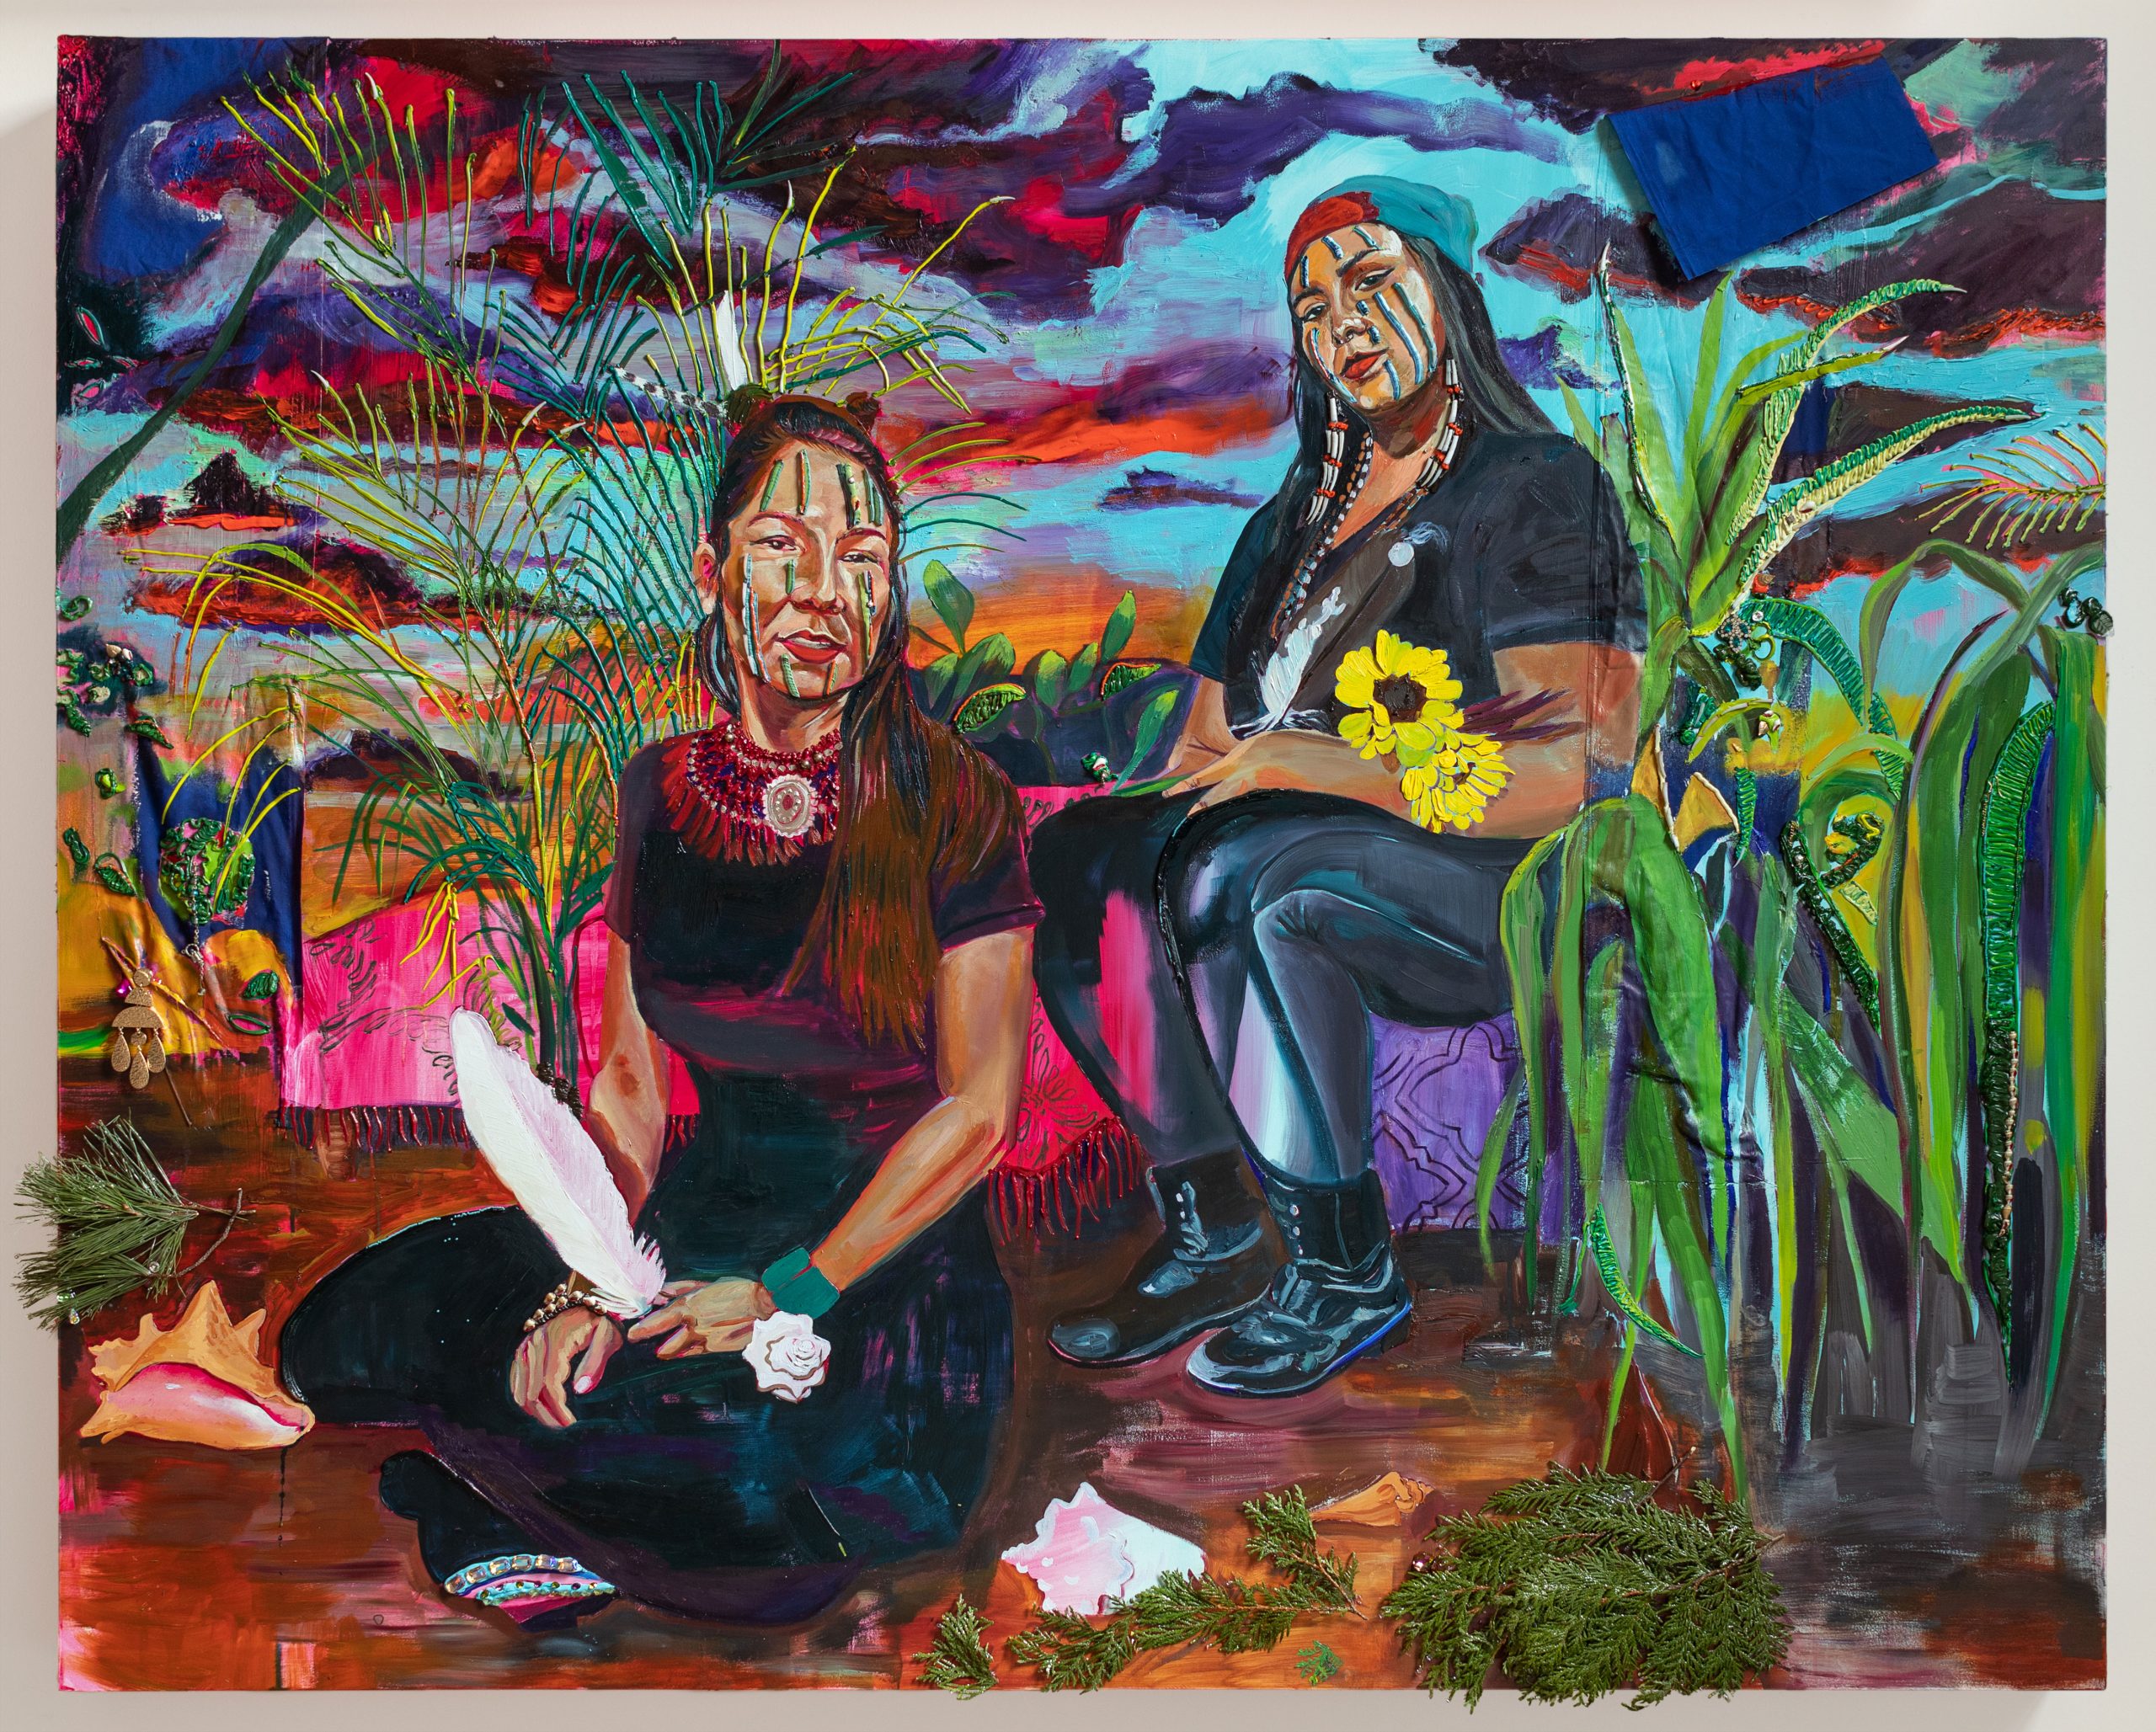 A painting of two people with long dark hair, medium skin tones, and colorful vertical stripes on their faces in a vibrant landscape.